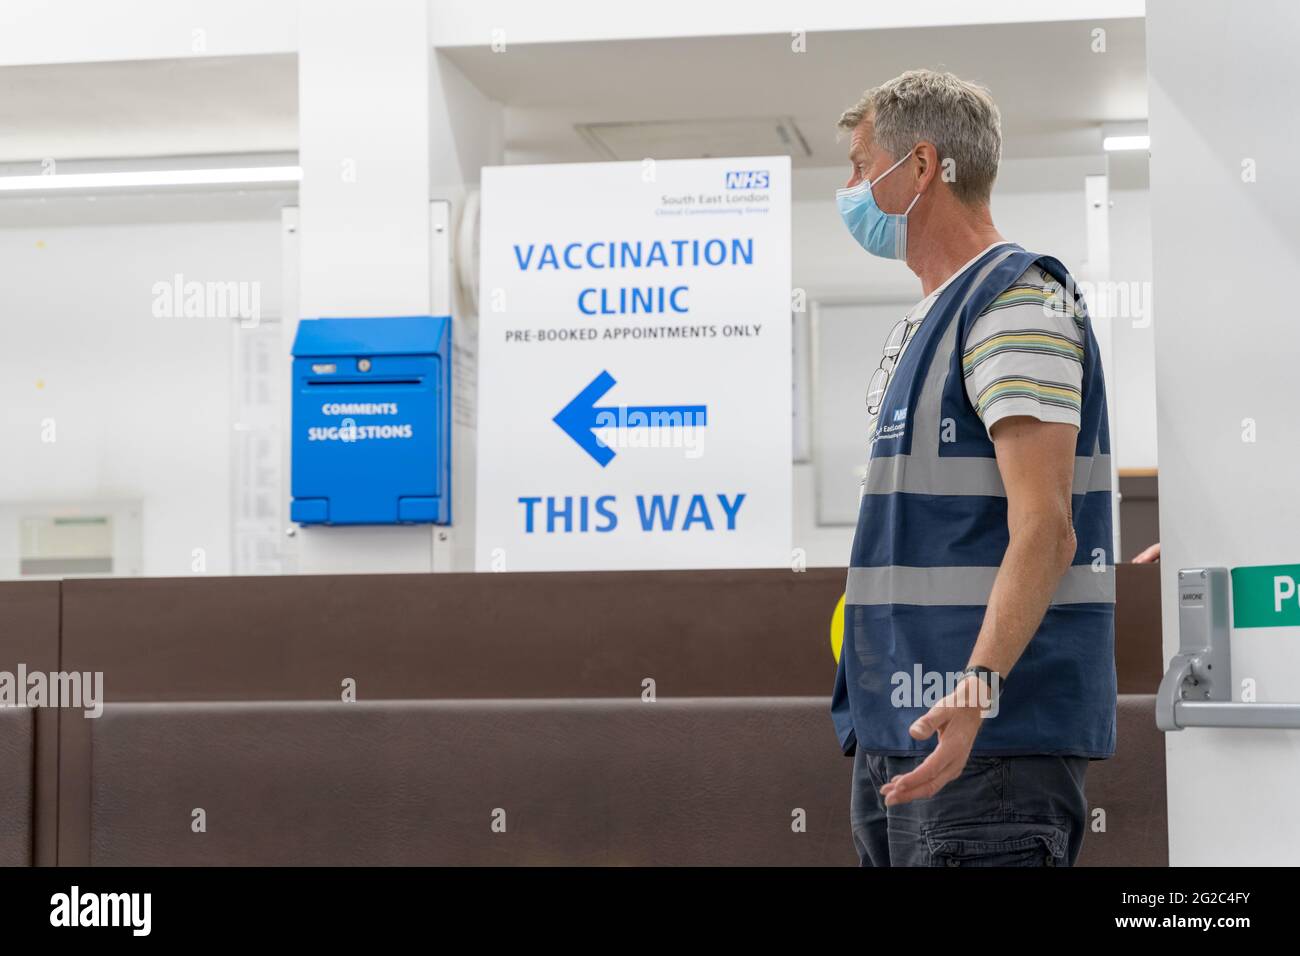 Volunteer directing people to the Covid-19 Vaccination clinic by south east london clinical commissioning group, England, UK Stock Photo